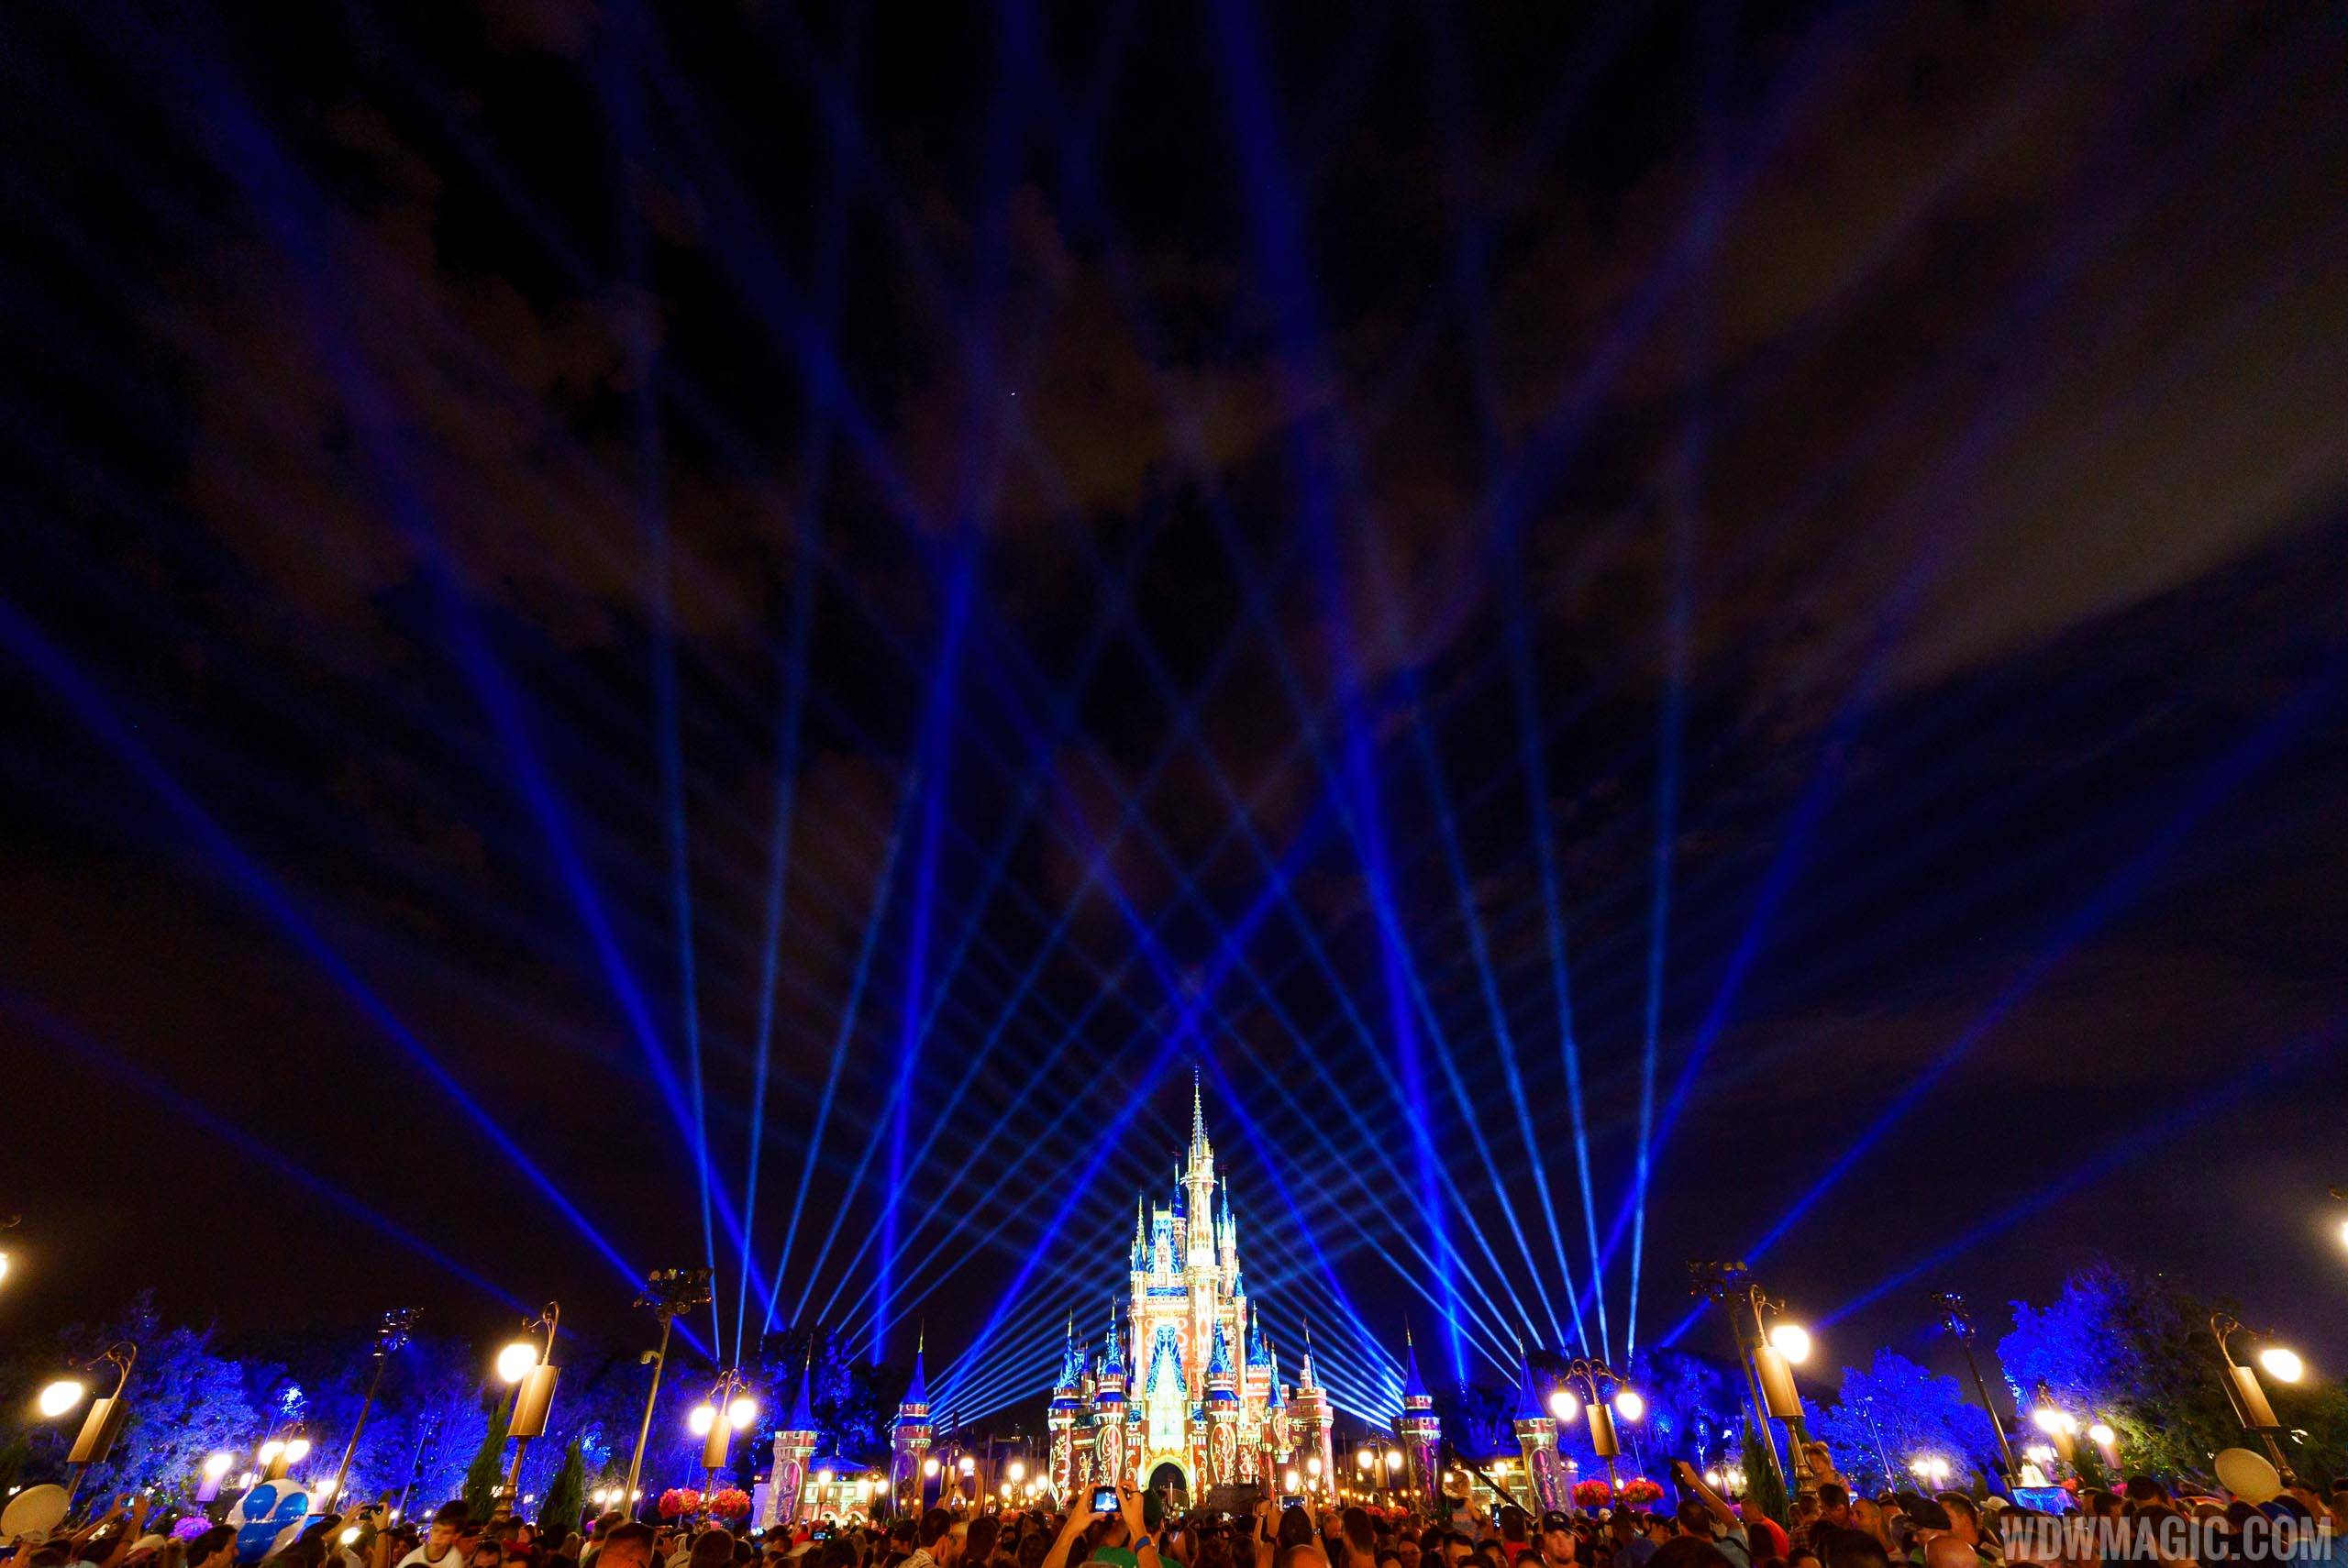 VIDEO - Happily Ever After debuts at the Magic Kingdom